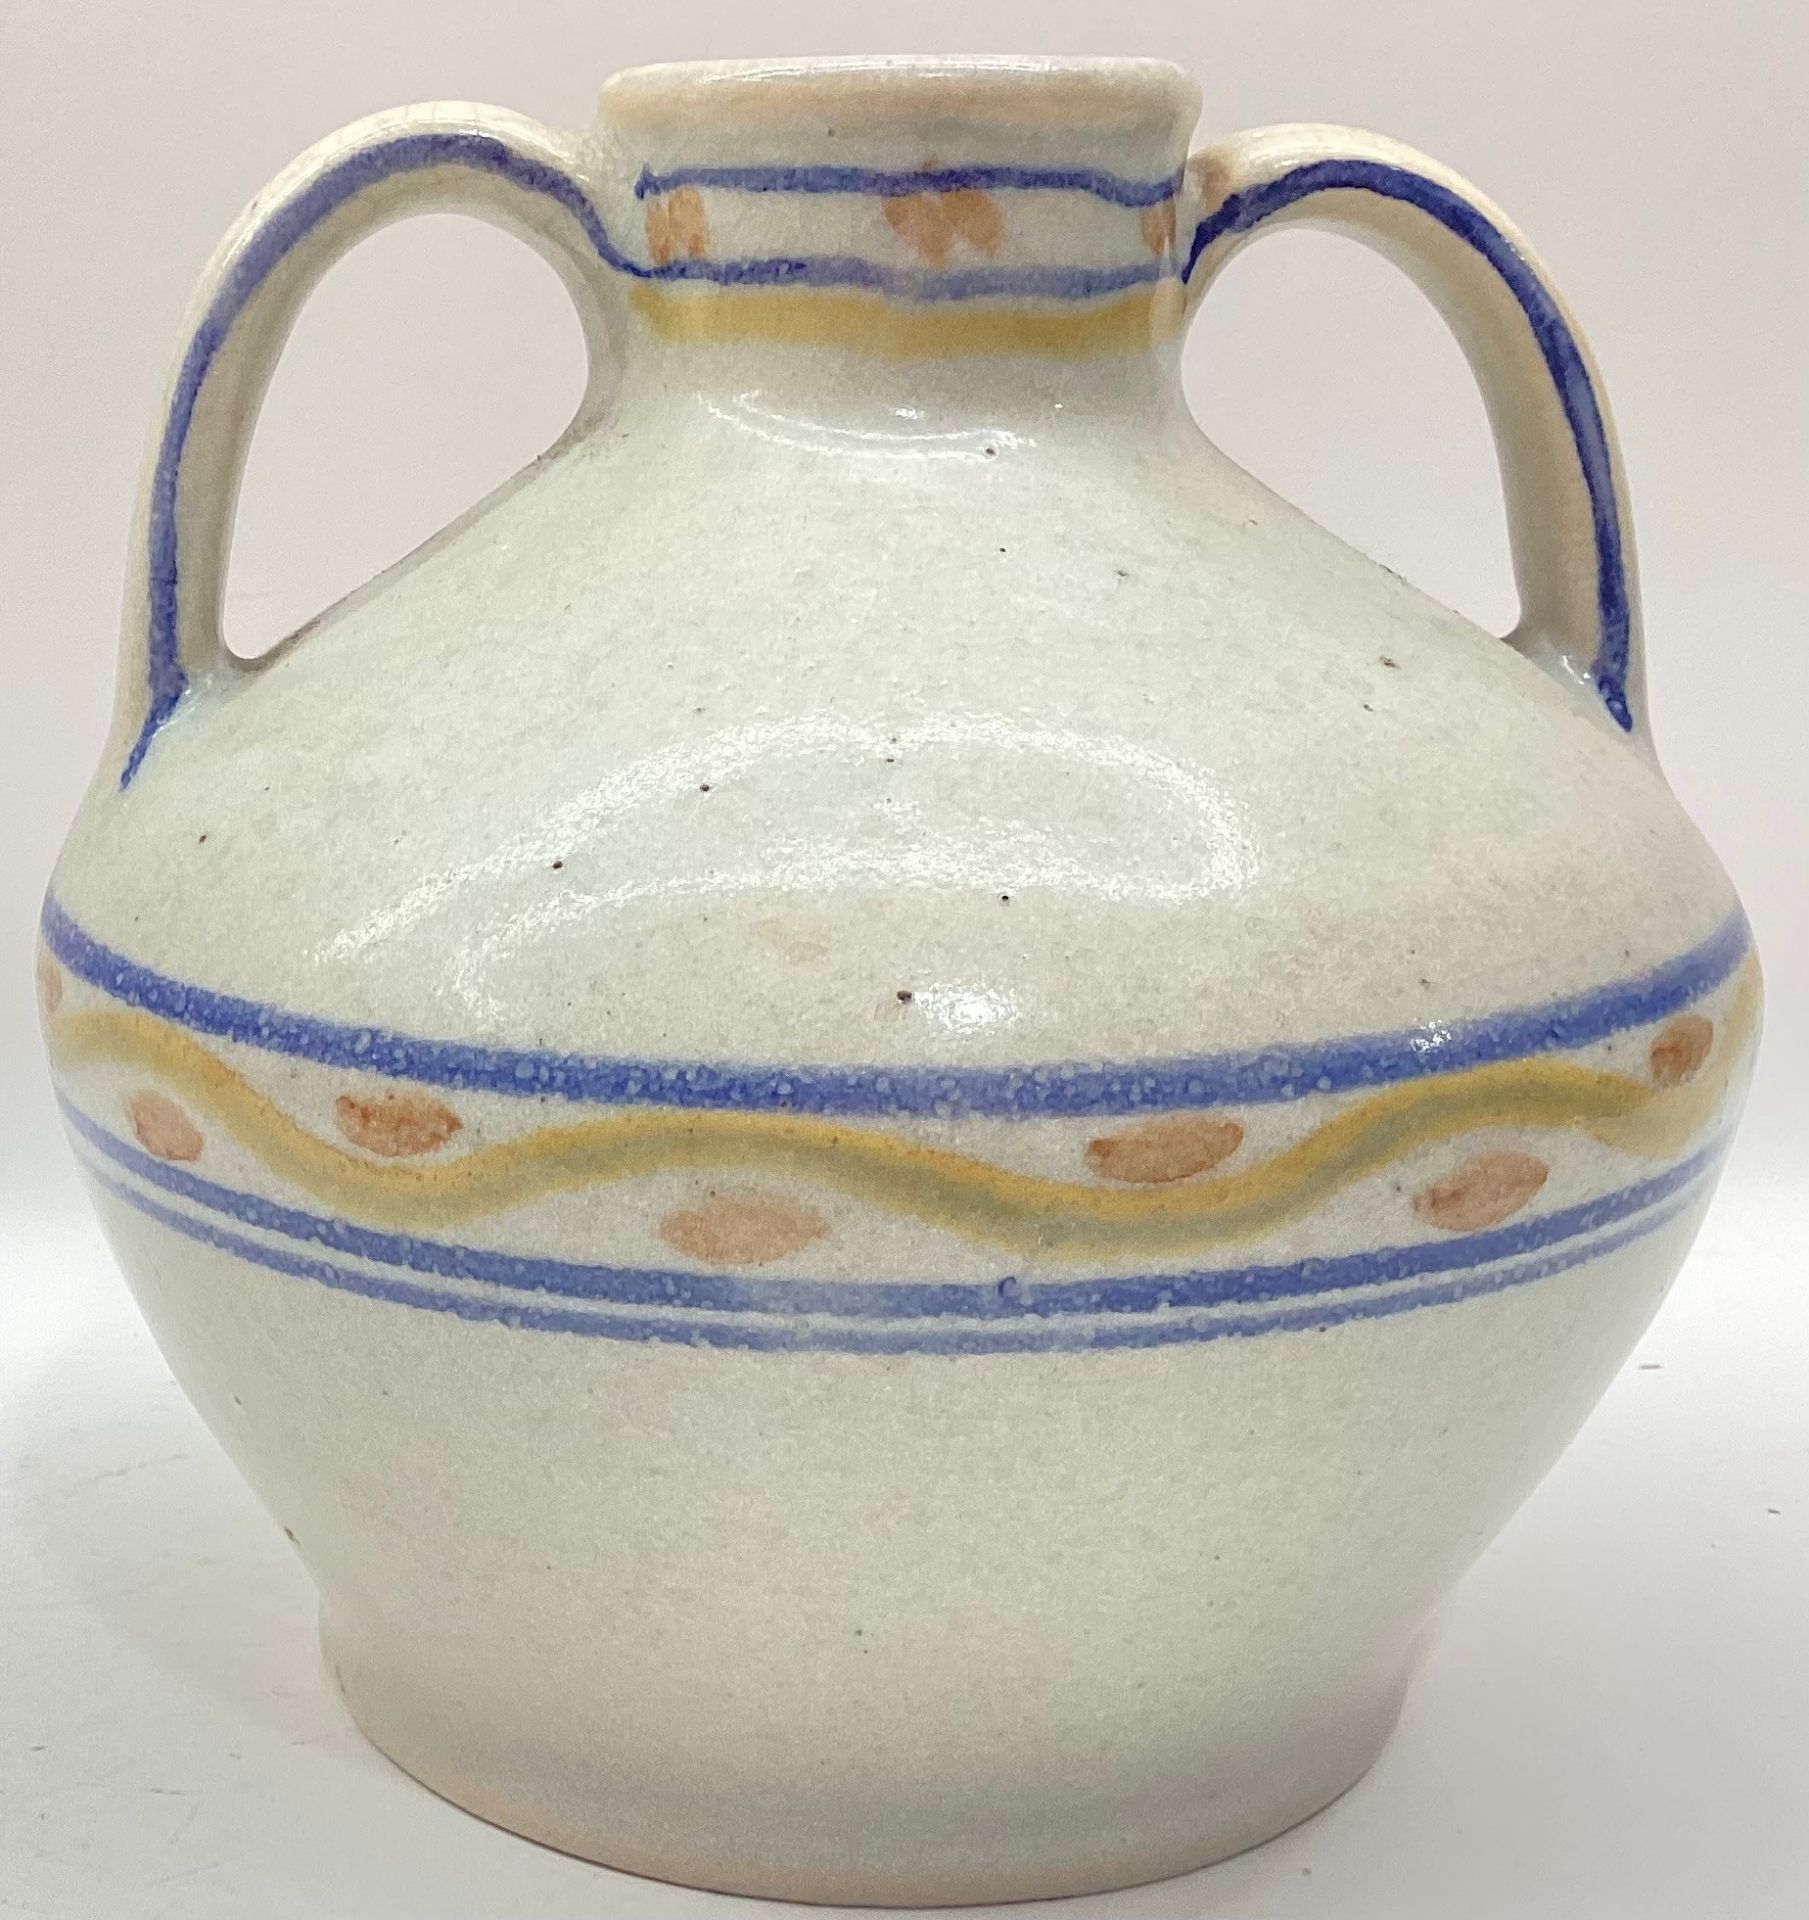 Poole Pottery Carter Stabler Adams shape 202 A/GE pattern twin handled vase 6.5" high. - Image 2 of 4